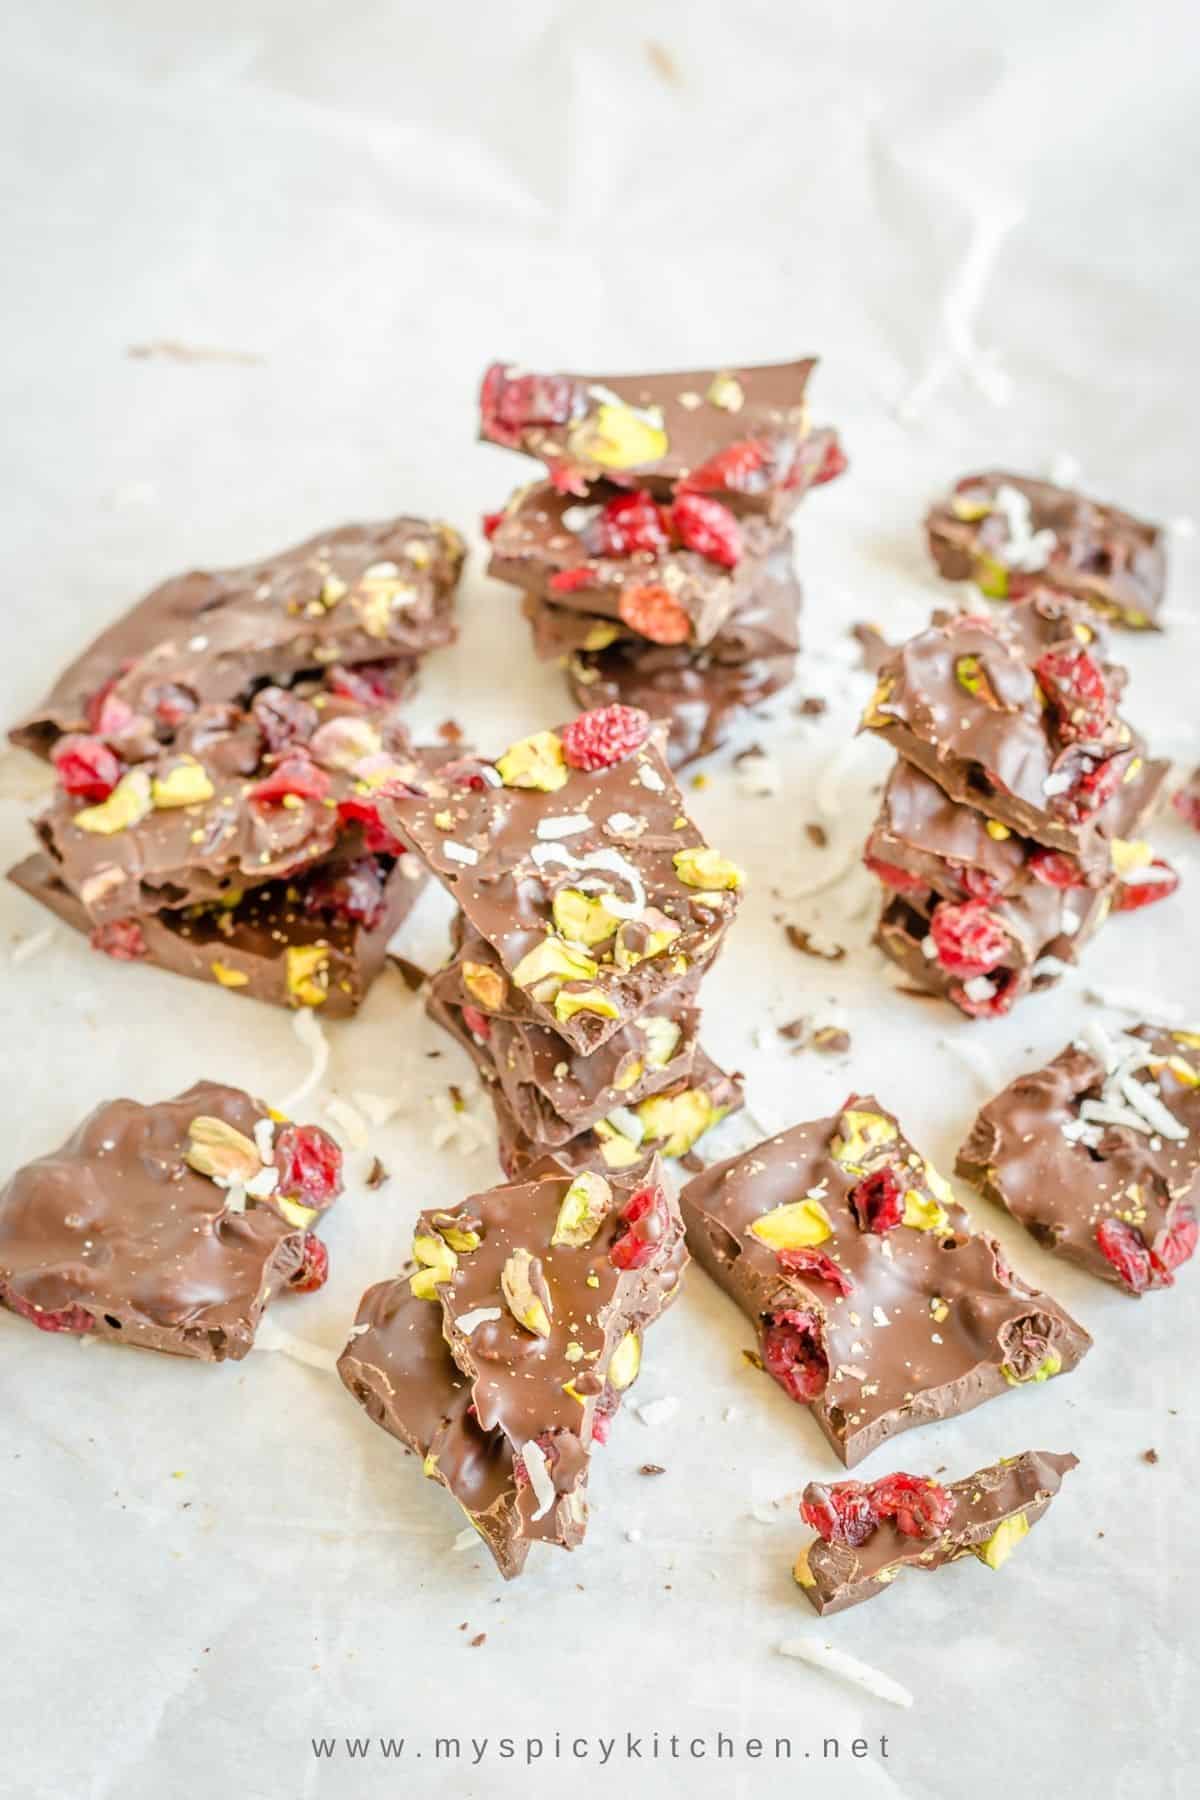 Stacks of dark chocolate bark on parchment paper.